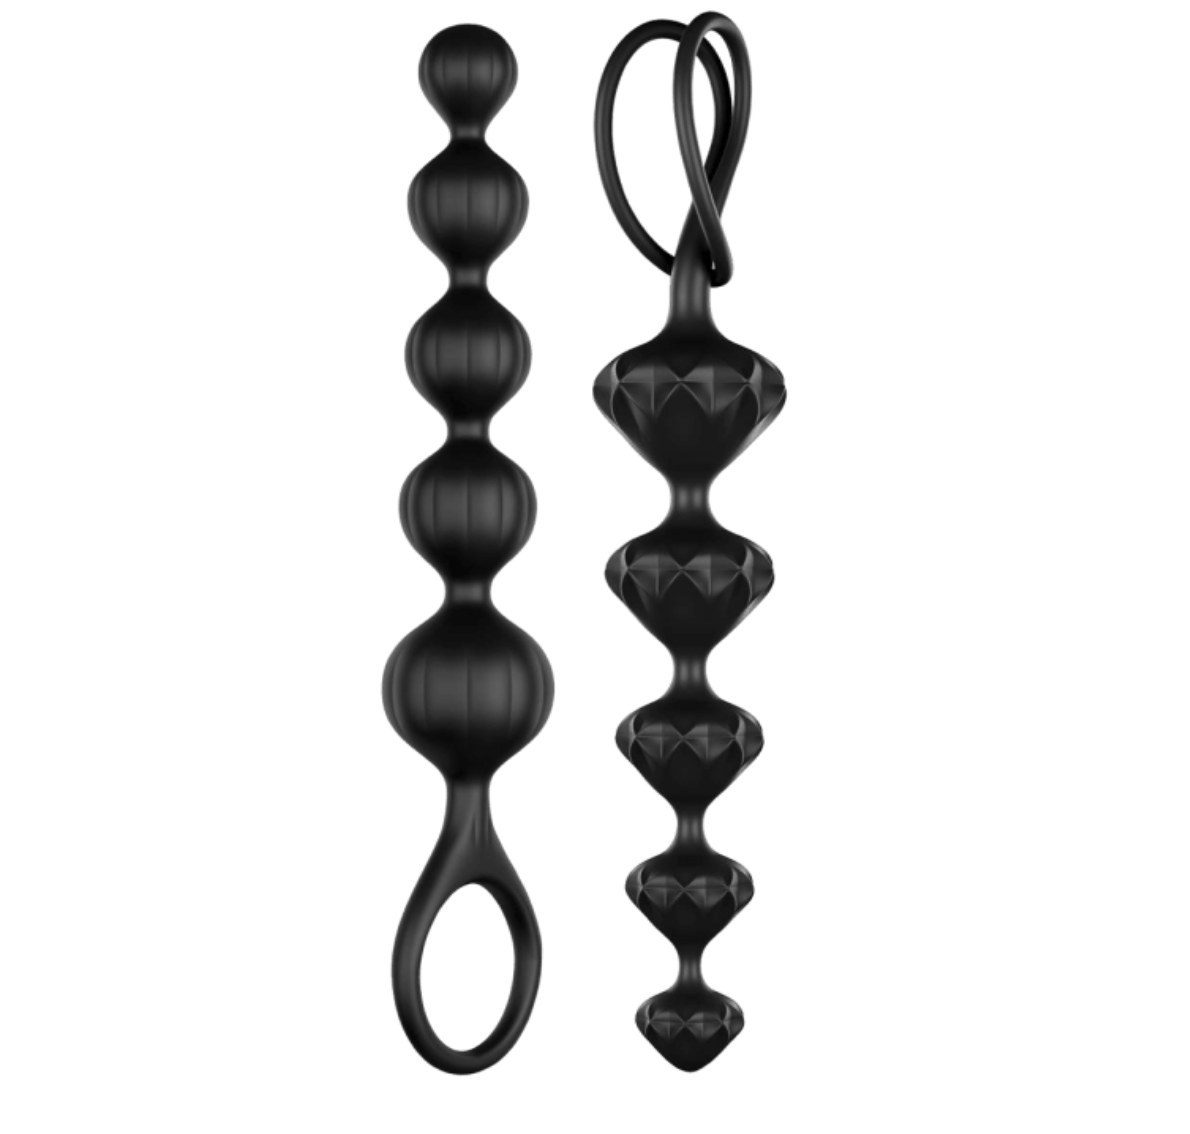 Black anal beads in varying sizes